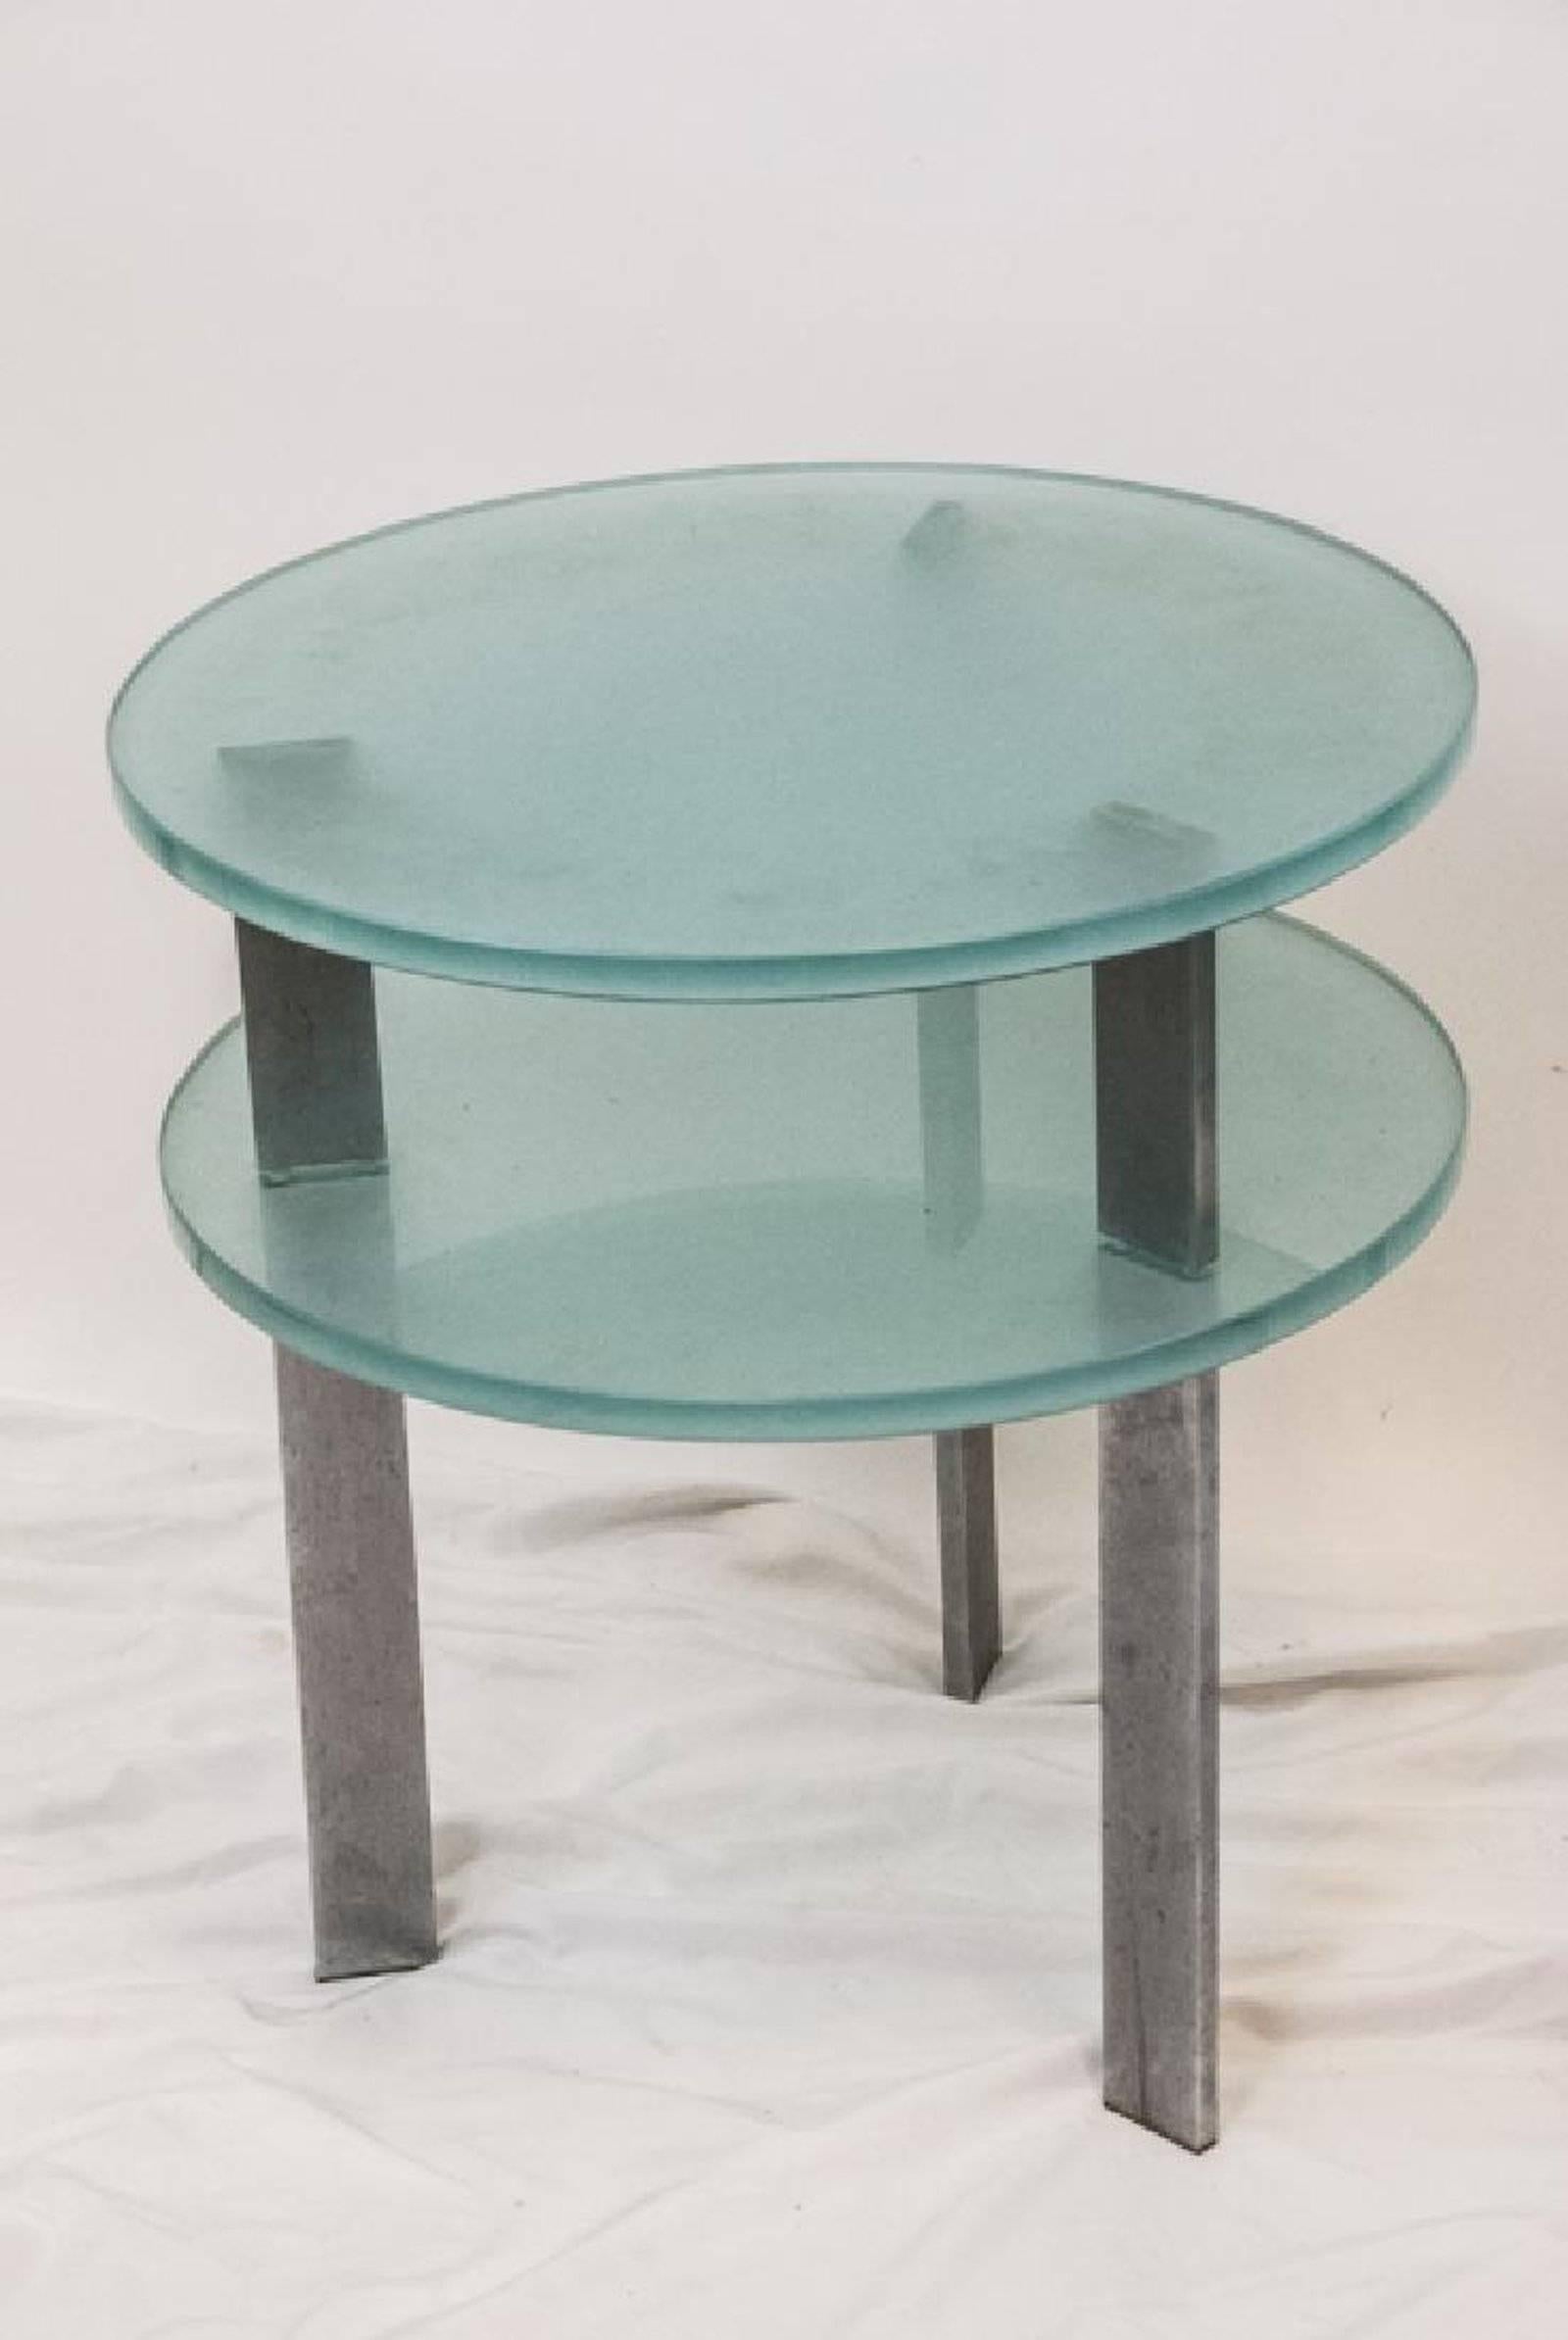 Pair of modern two-tier glass end tables, these tables feature stainless steel and frosted glass. Works well in modern or traditional decor. Can be side tables, end tables or occasional table.